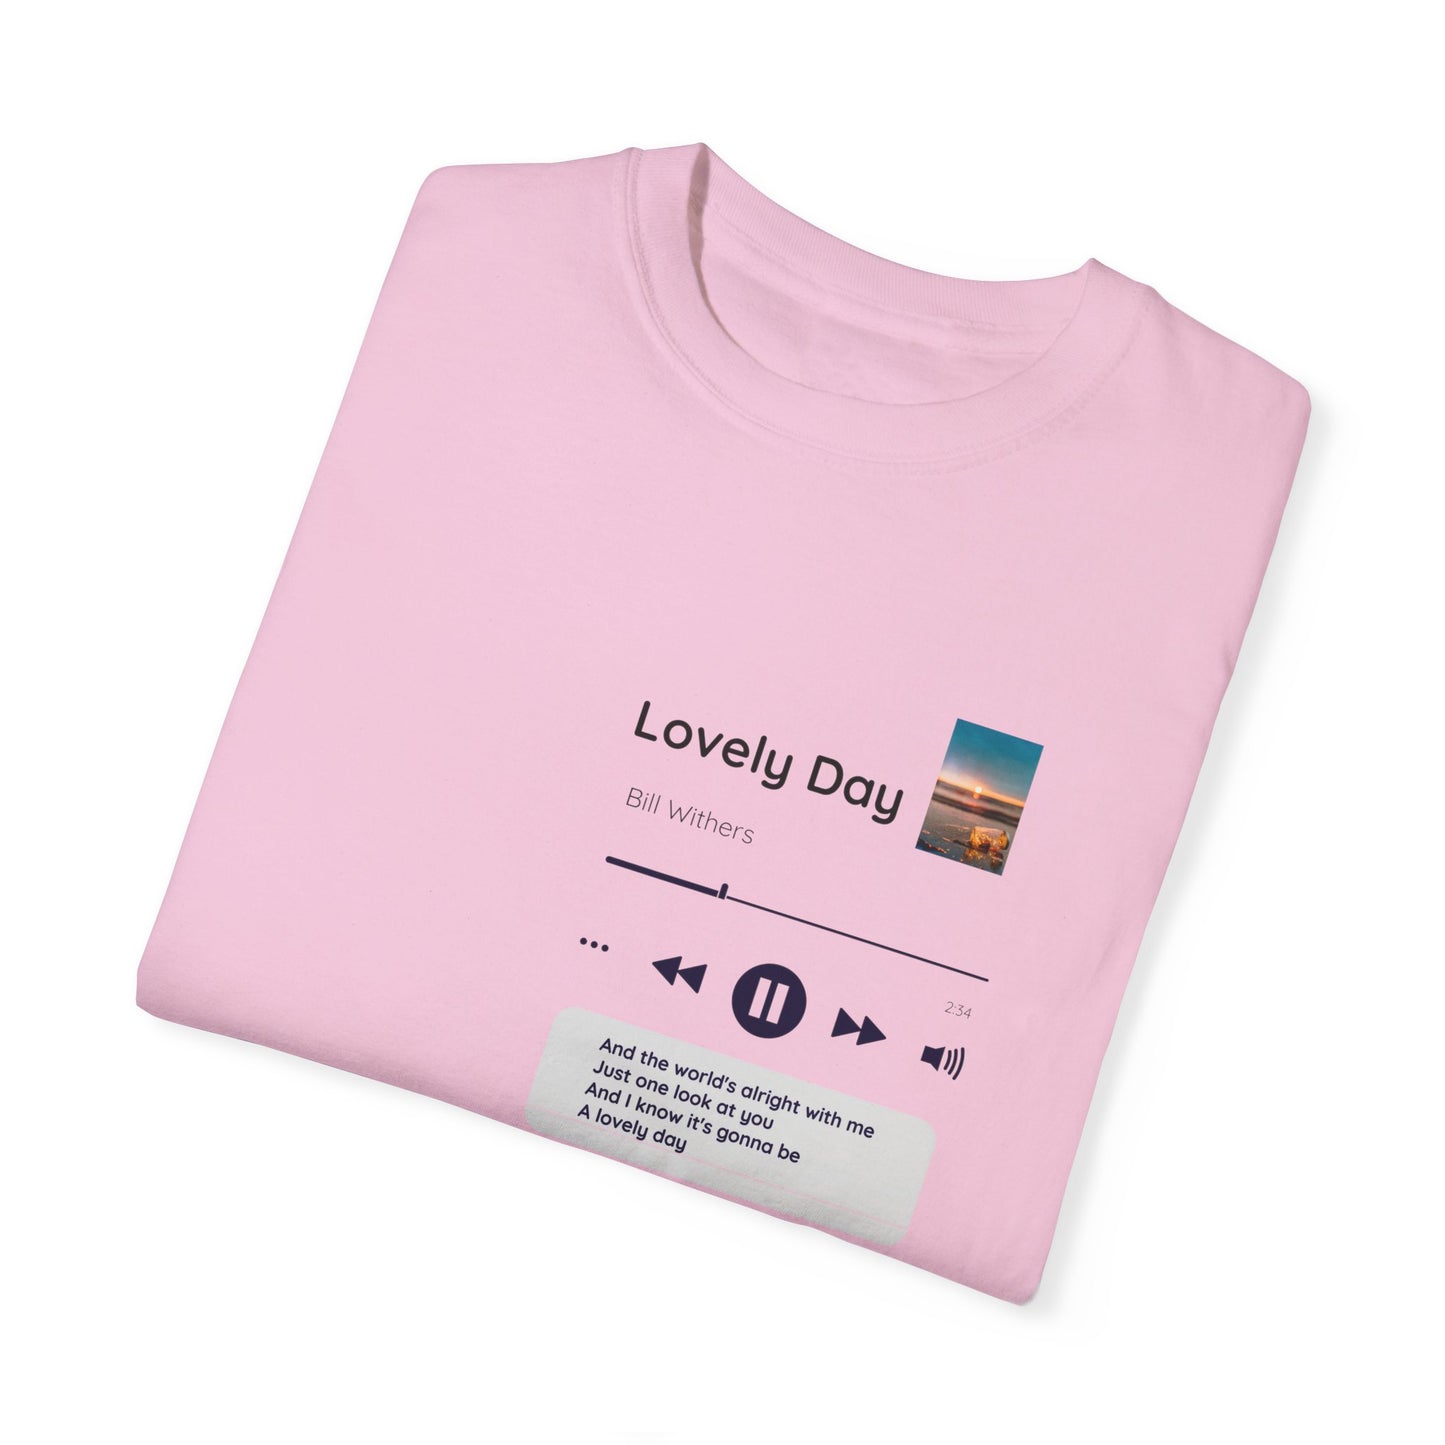 A lovely day song lyrics t-shirt for teachers, principals and admin